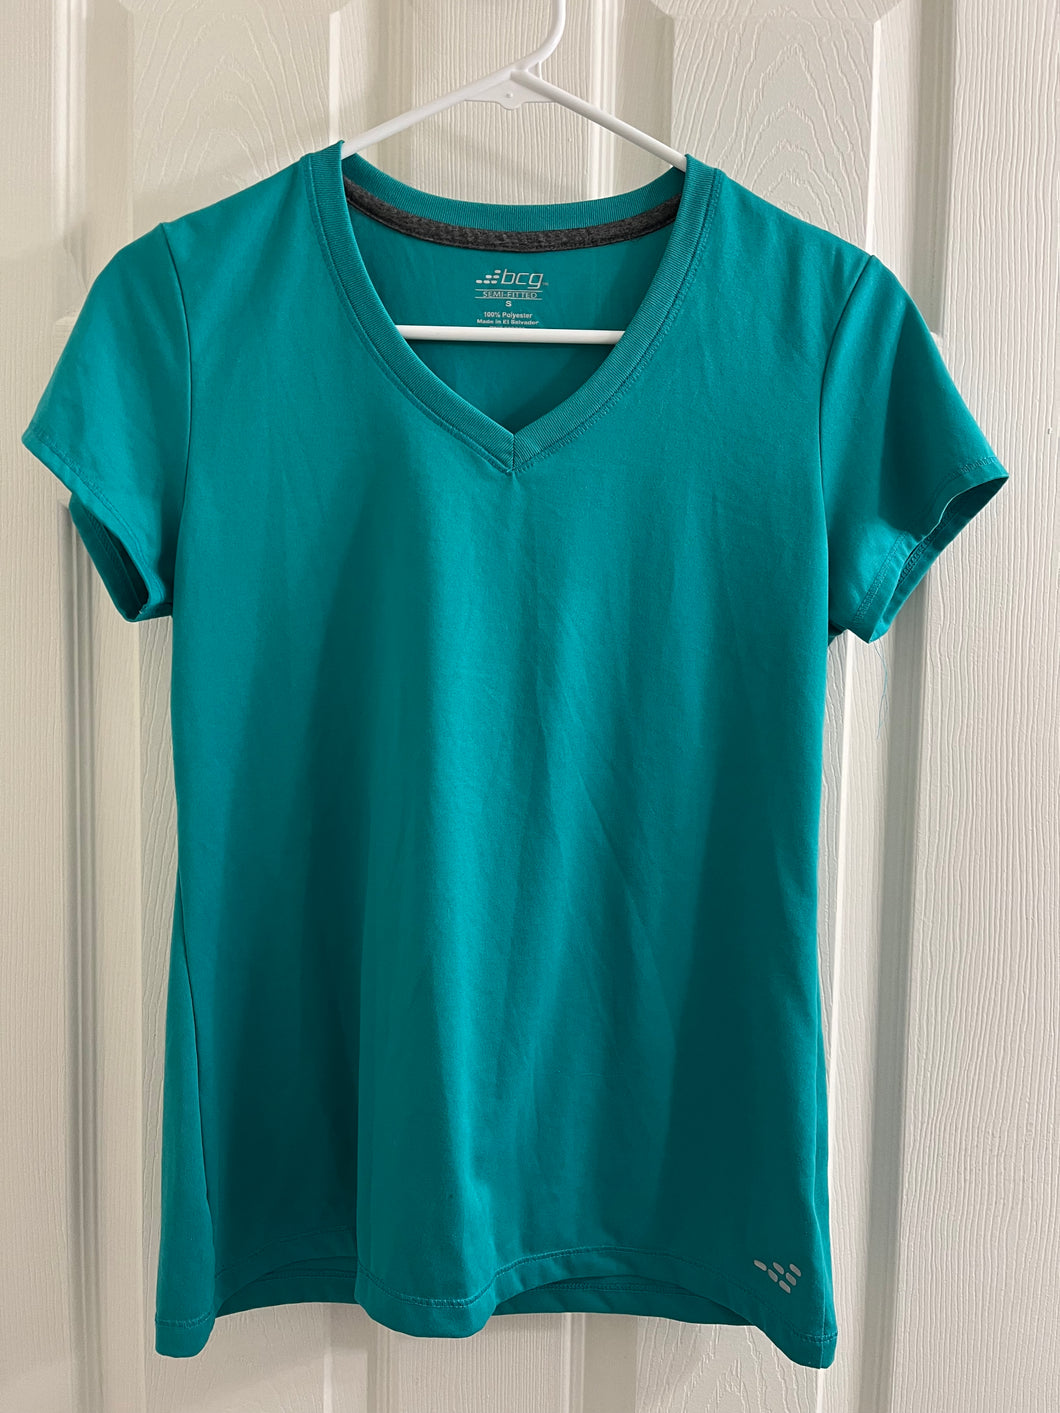 Teal athletic shirt - bcg (Academy house brand) Adult Small